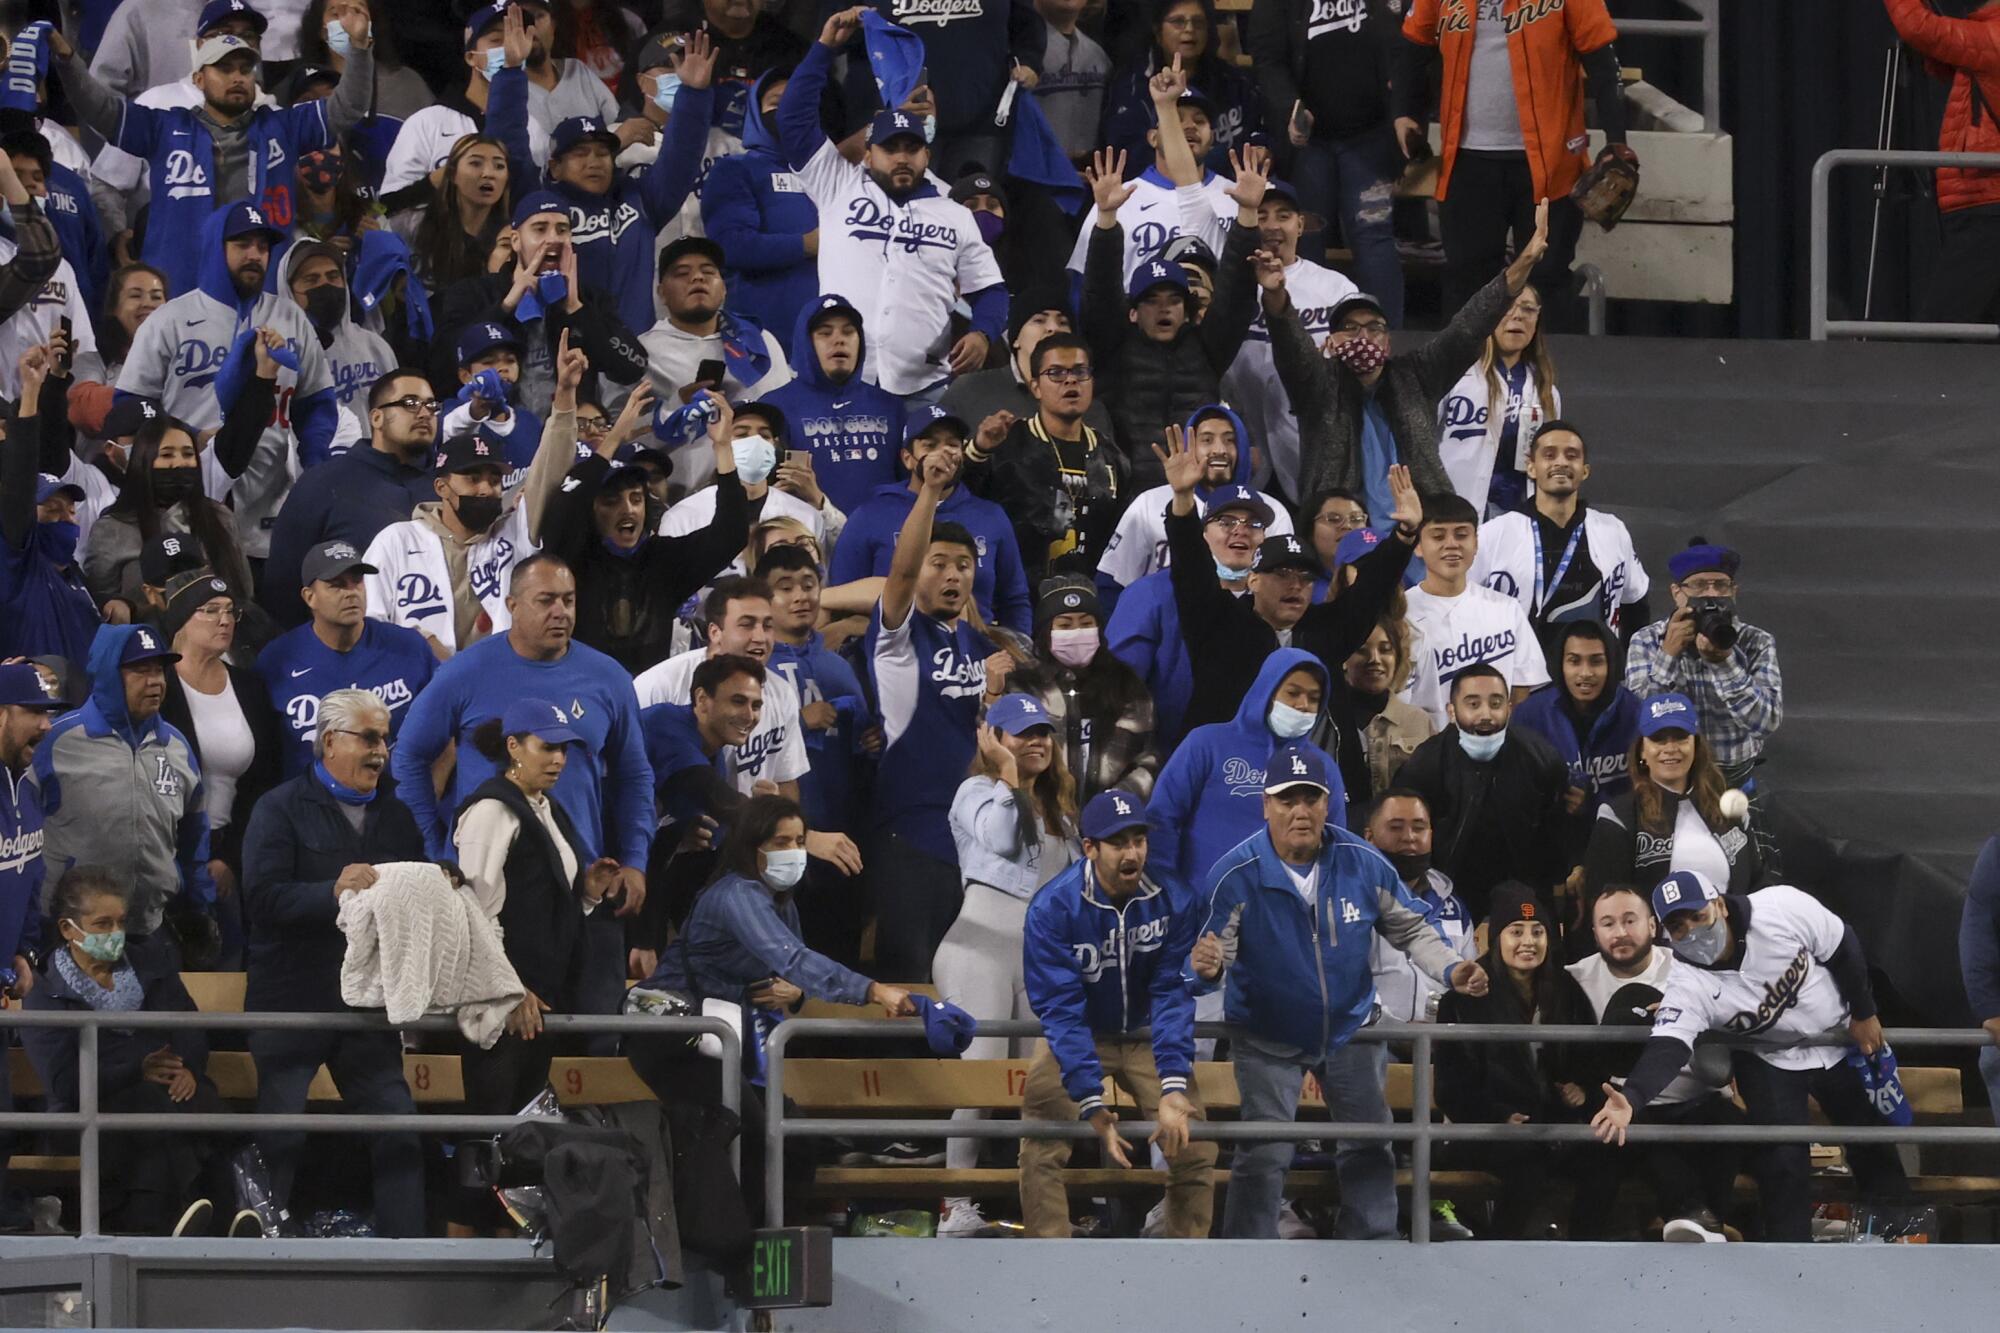 Fans in the stands reach for a two-run home run hit by Los Angeles Dodgers' Will Smith